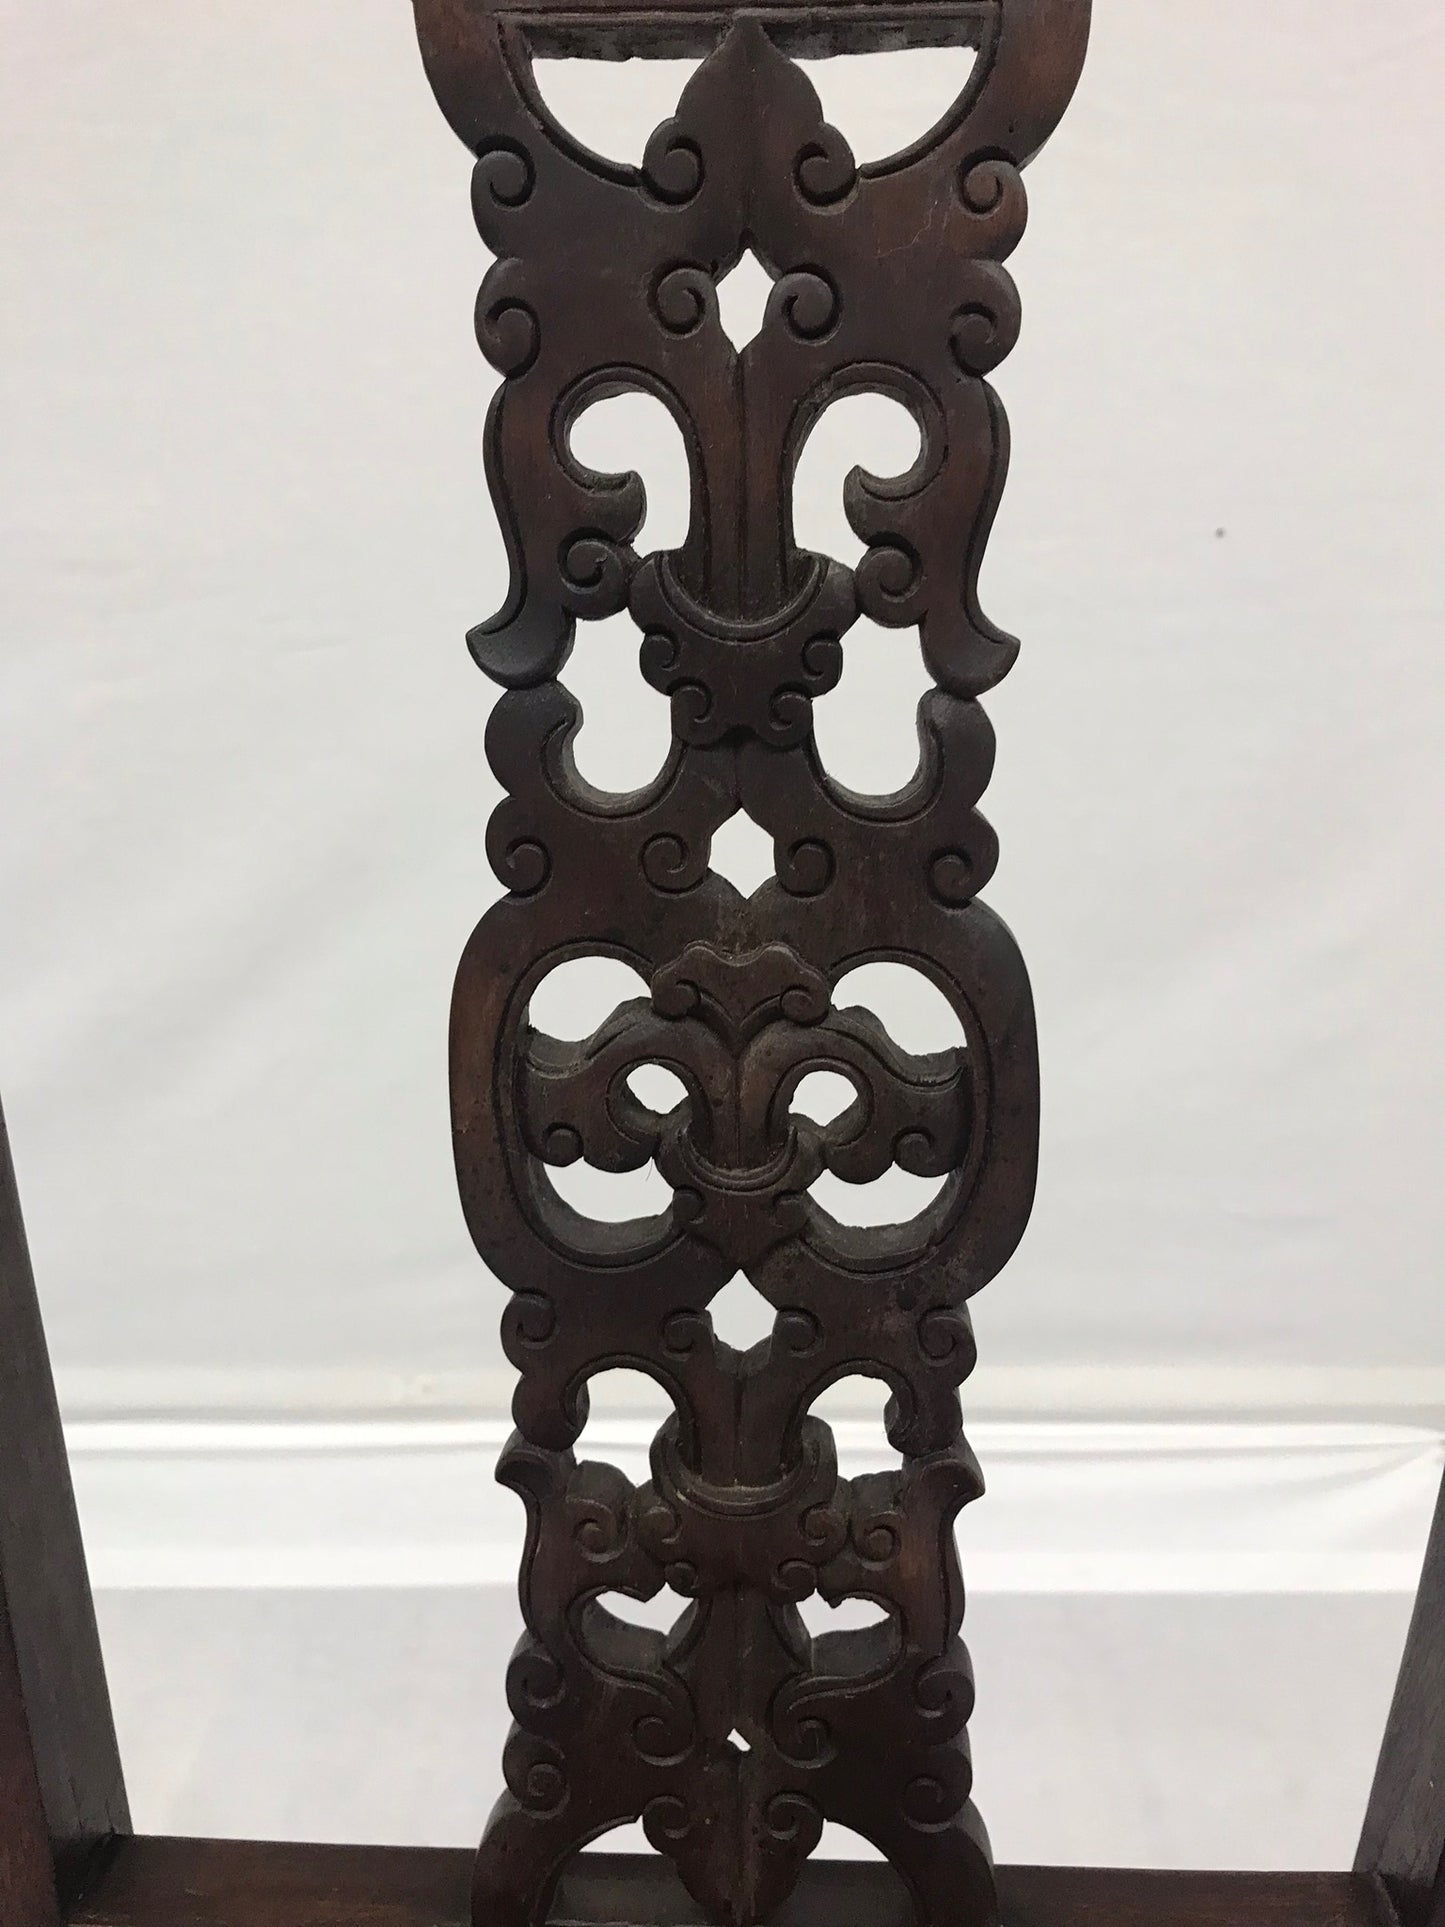 Early 20th Century Chinese Wood Hall Chair